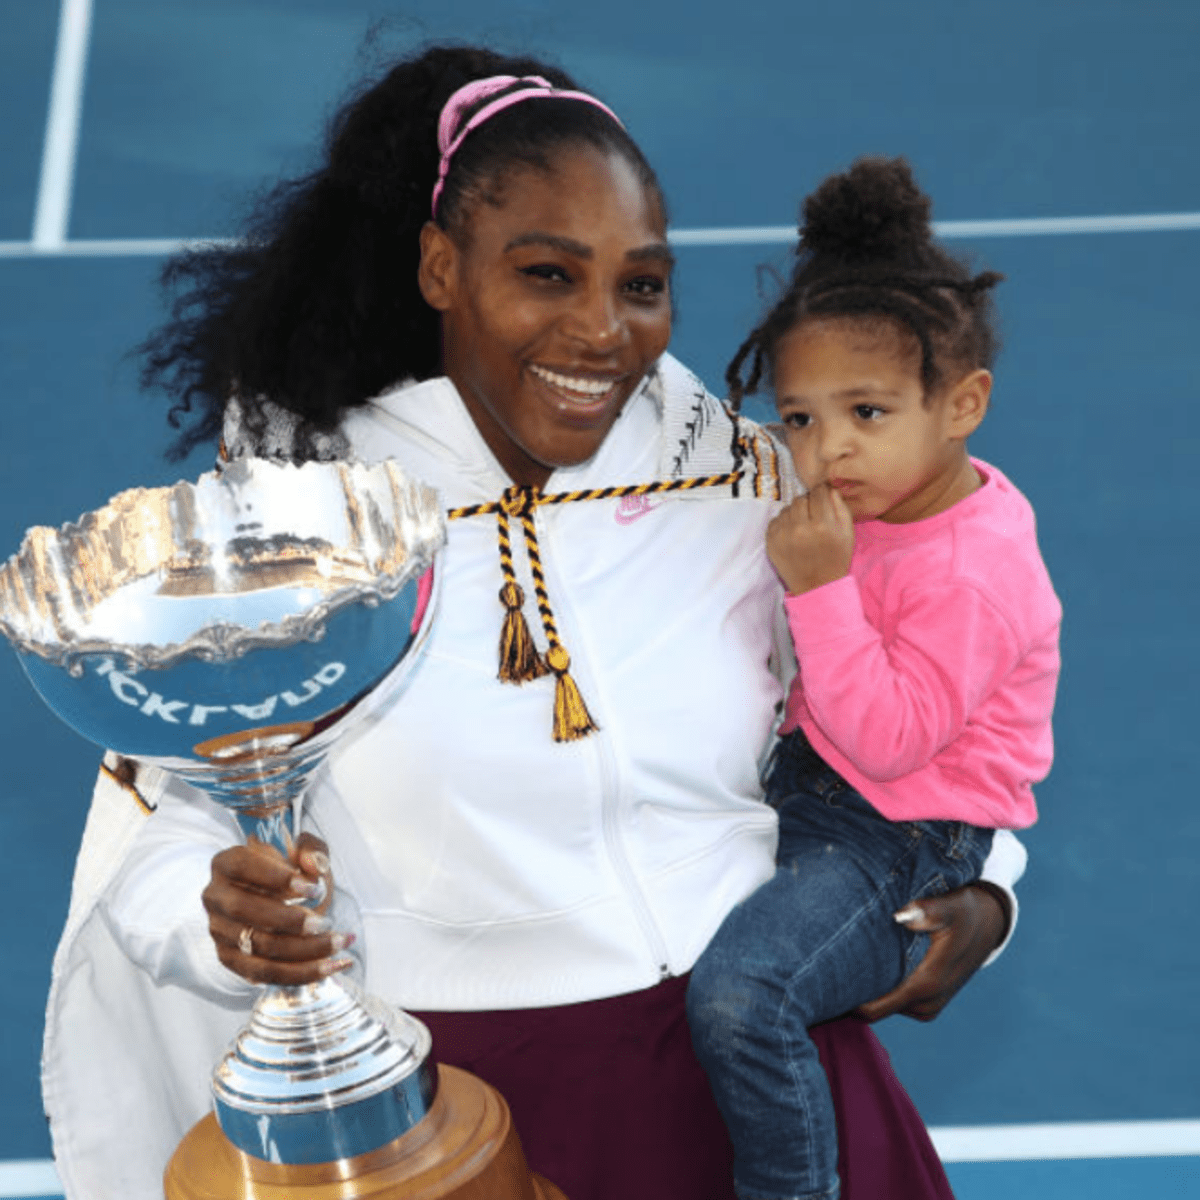 Serena Williams teases that she could “come back” to play tennis